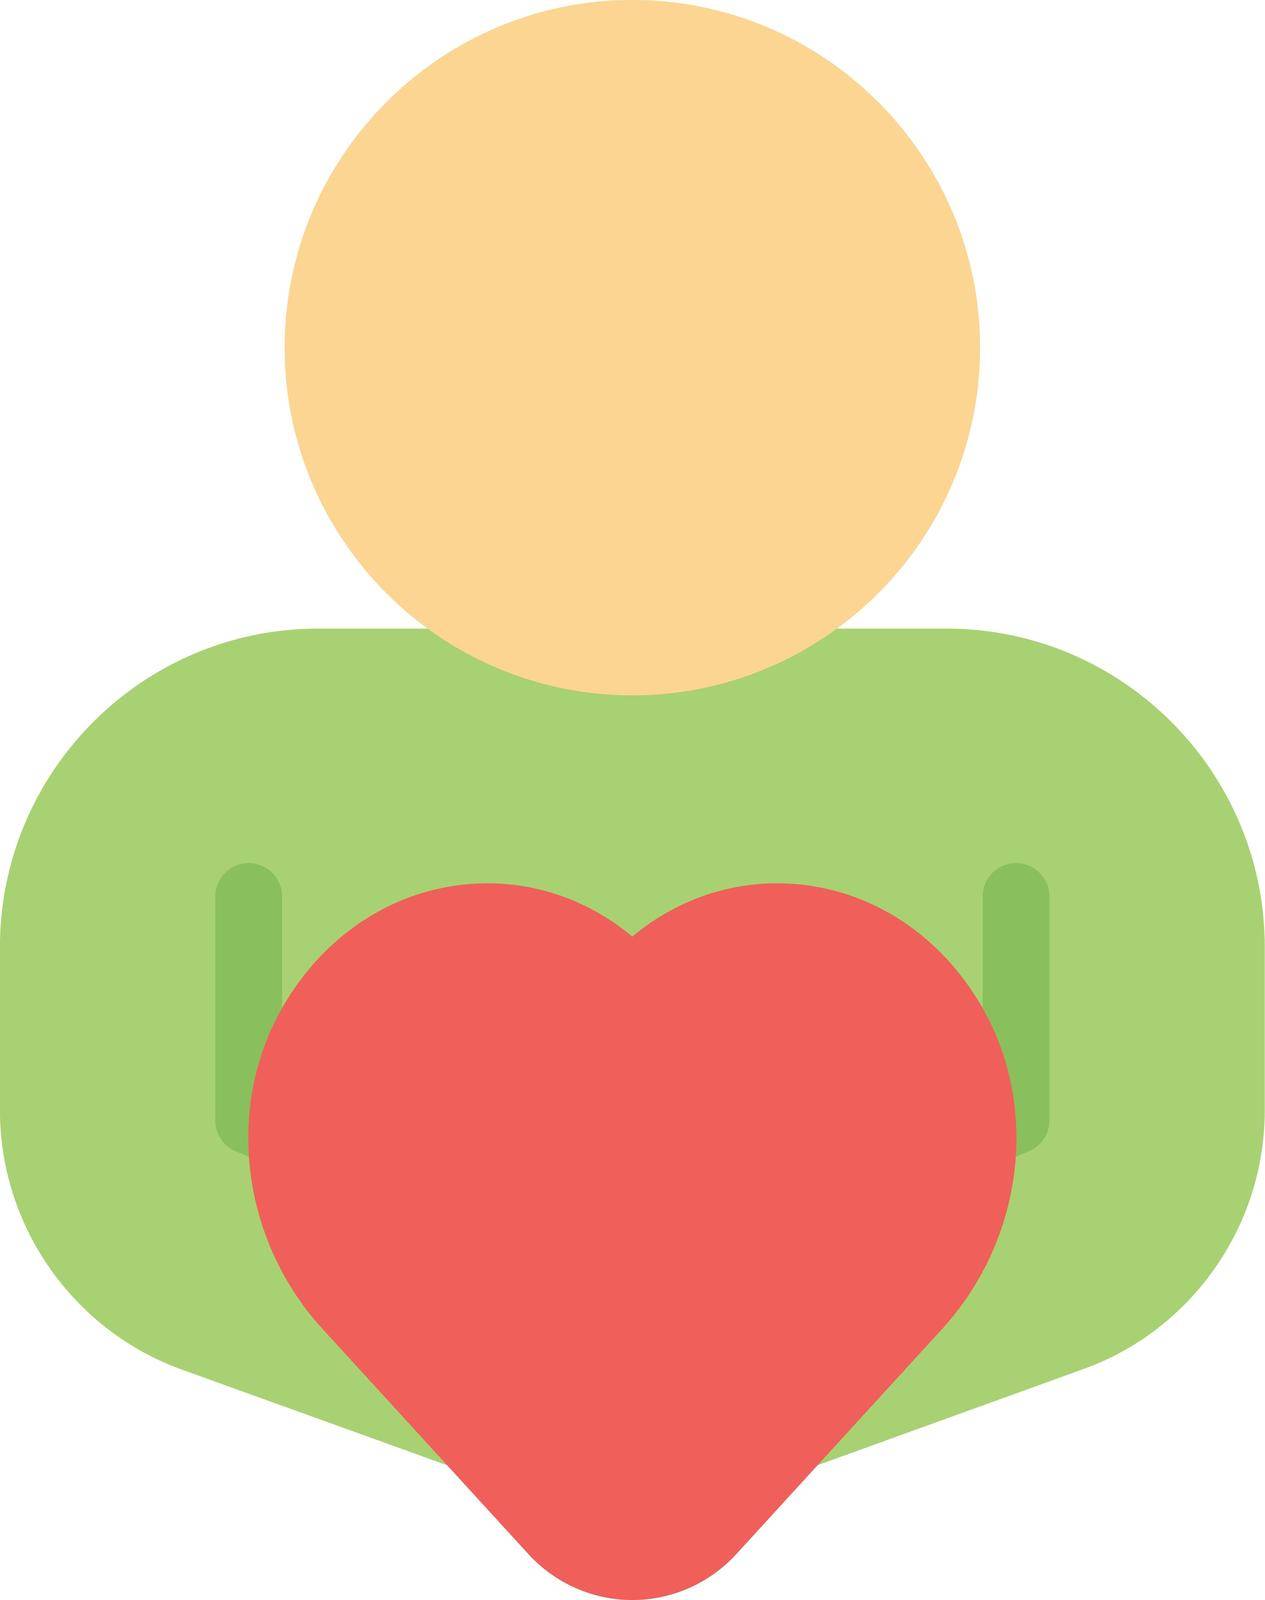 heart Vector illustration on a transparent background. Premium quality symmbols. Line Color vector icons for concept and graphic design.